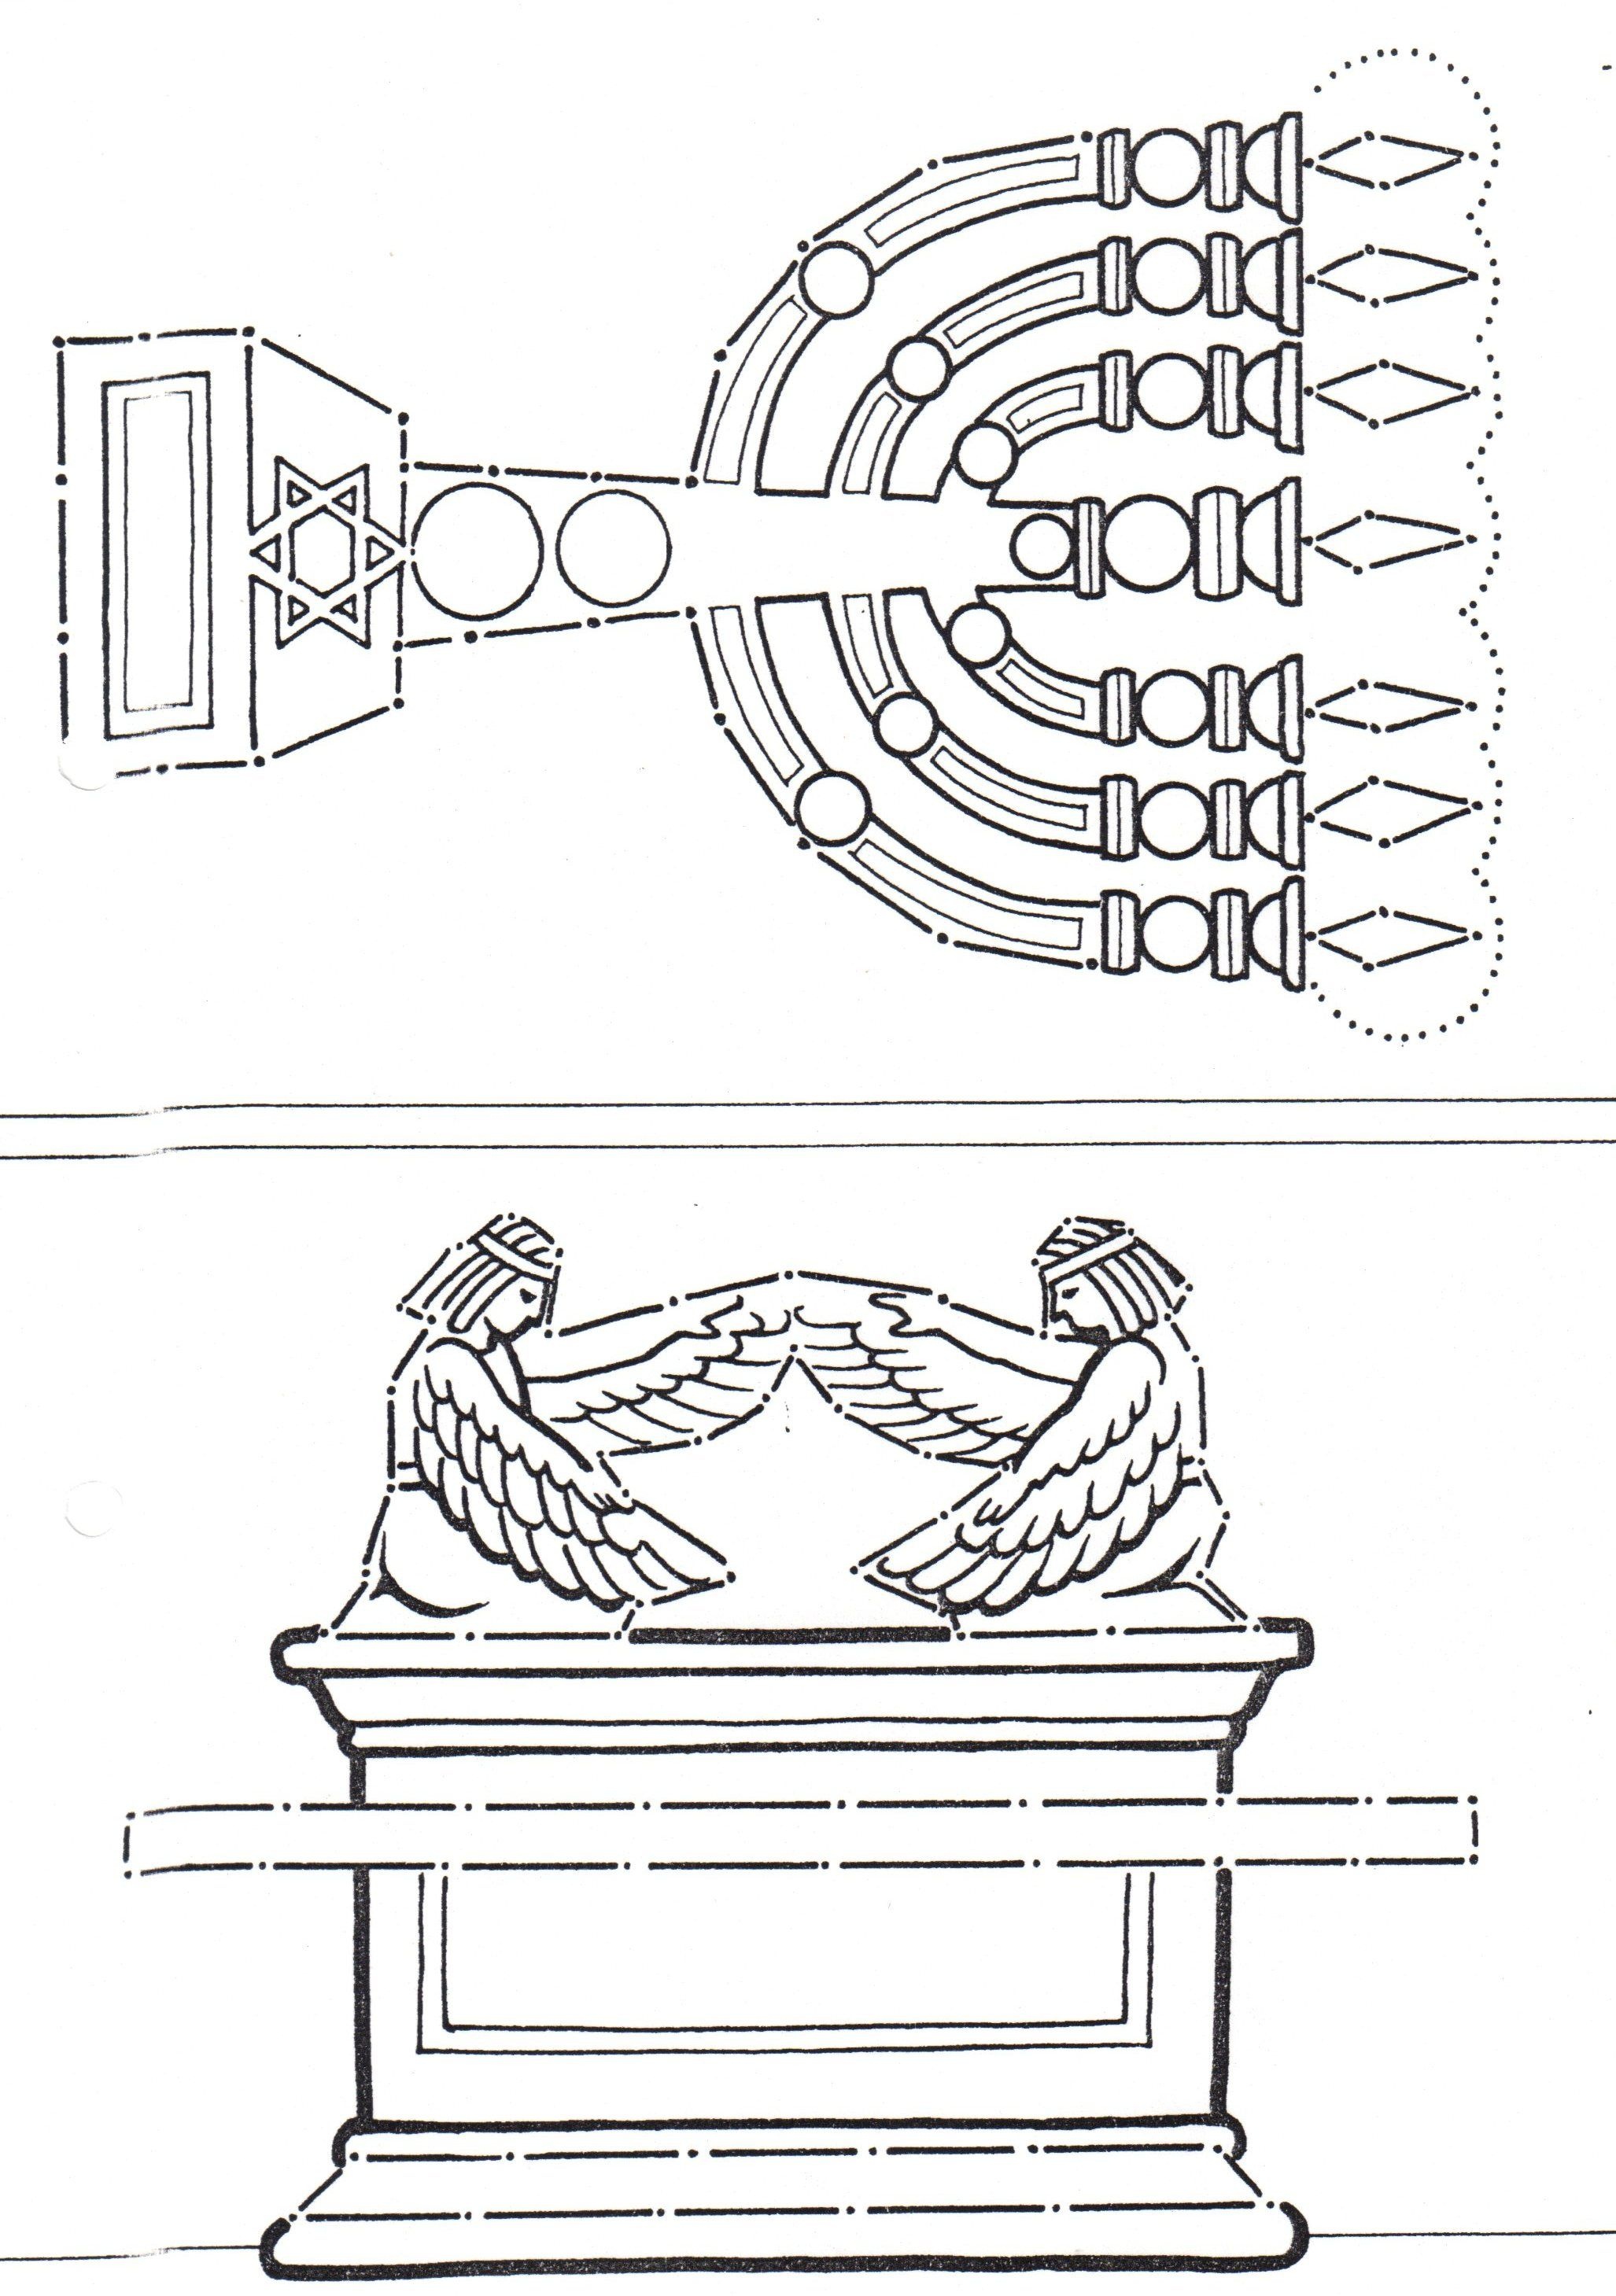 Coloring Pages Ark Of The Covenant And Lampstand From Tabernacle - Free Printable Pictures Of The Tabernacle